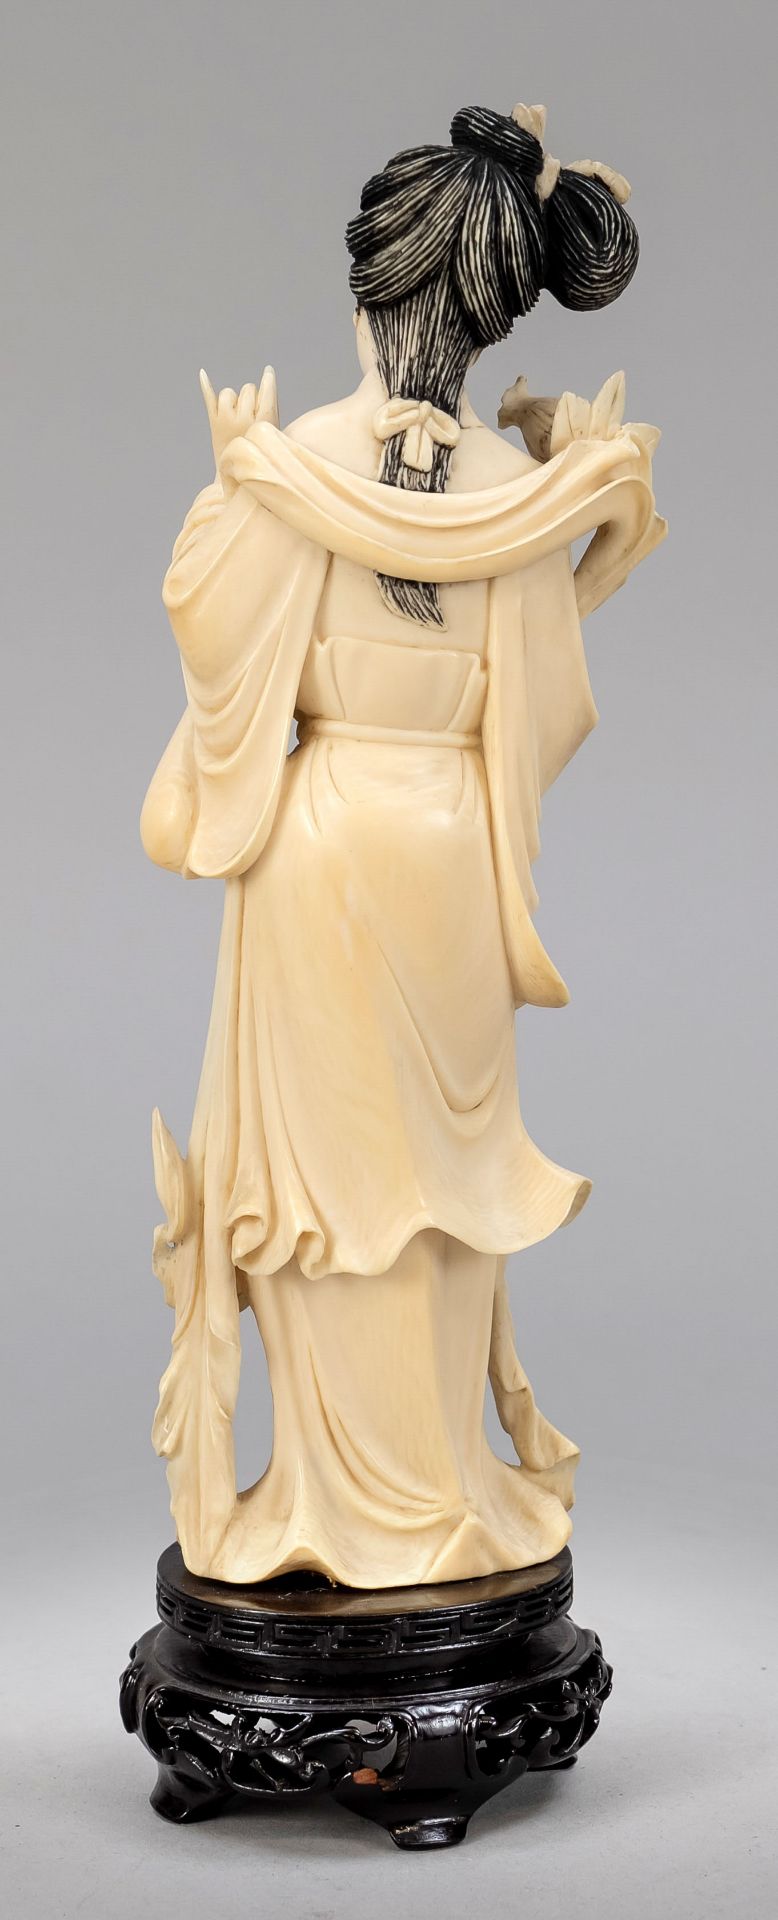 Courtesan, China, early 20th century, ivory carving, partially blackened / decorated. Mounted on - Image 2 of 2